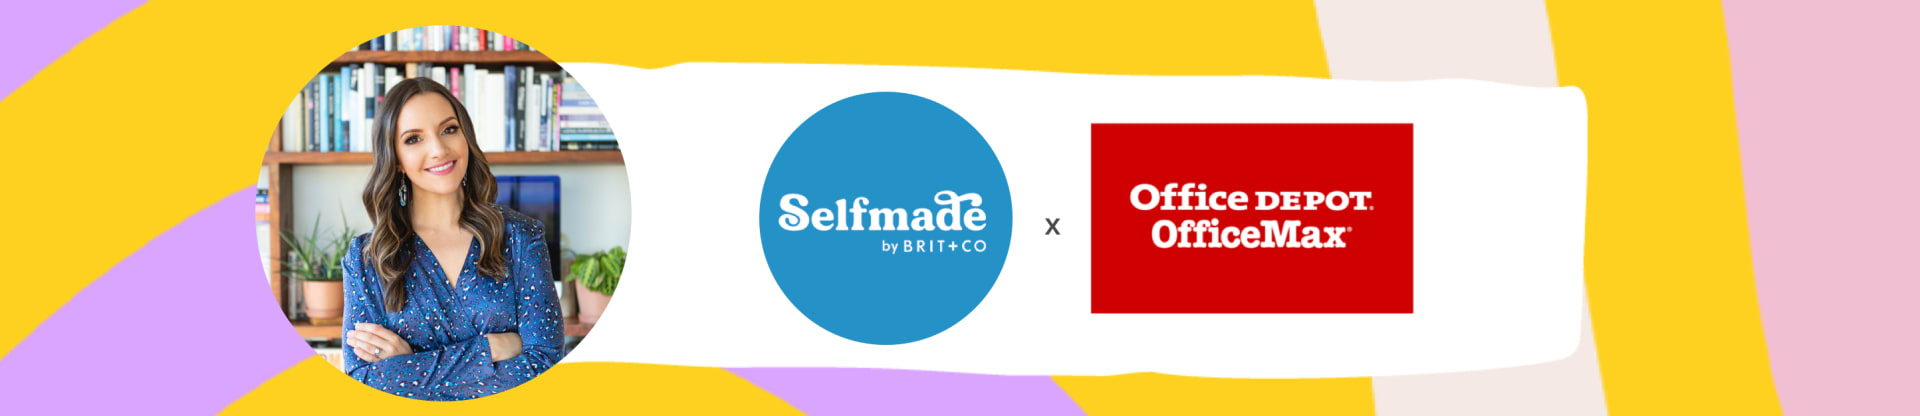 Selfmade | Brit+CO X Office Depot OfficeMax